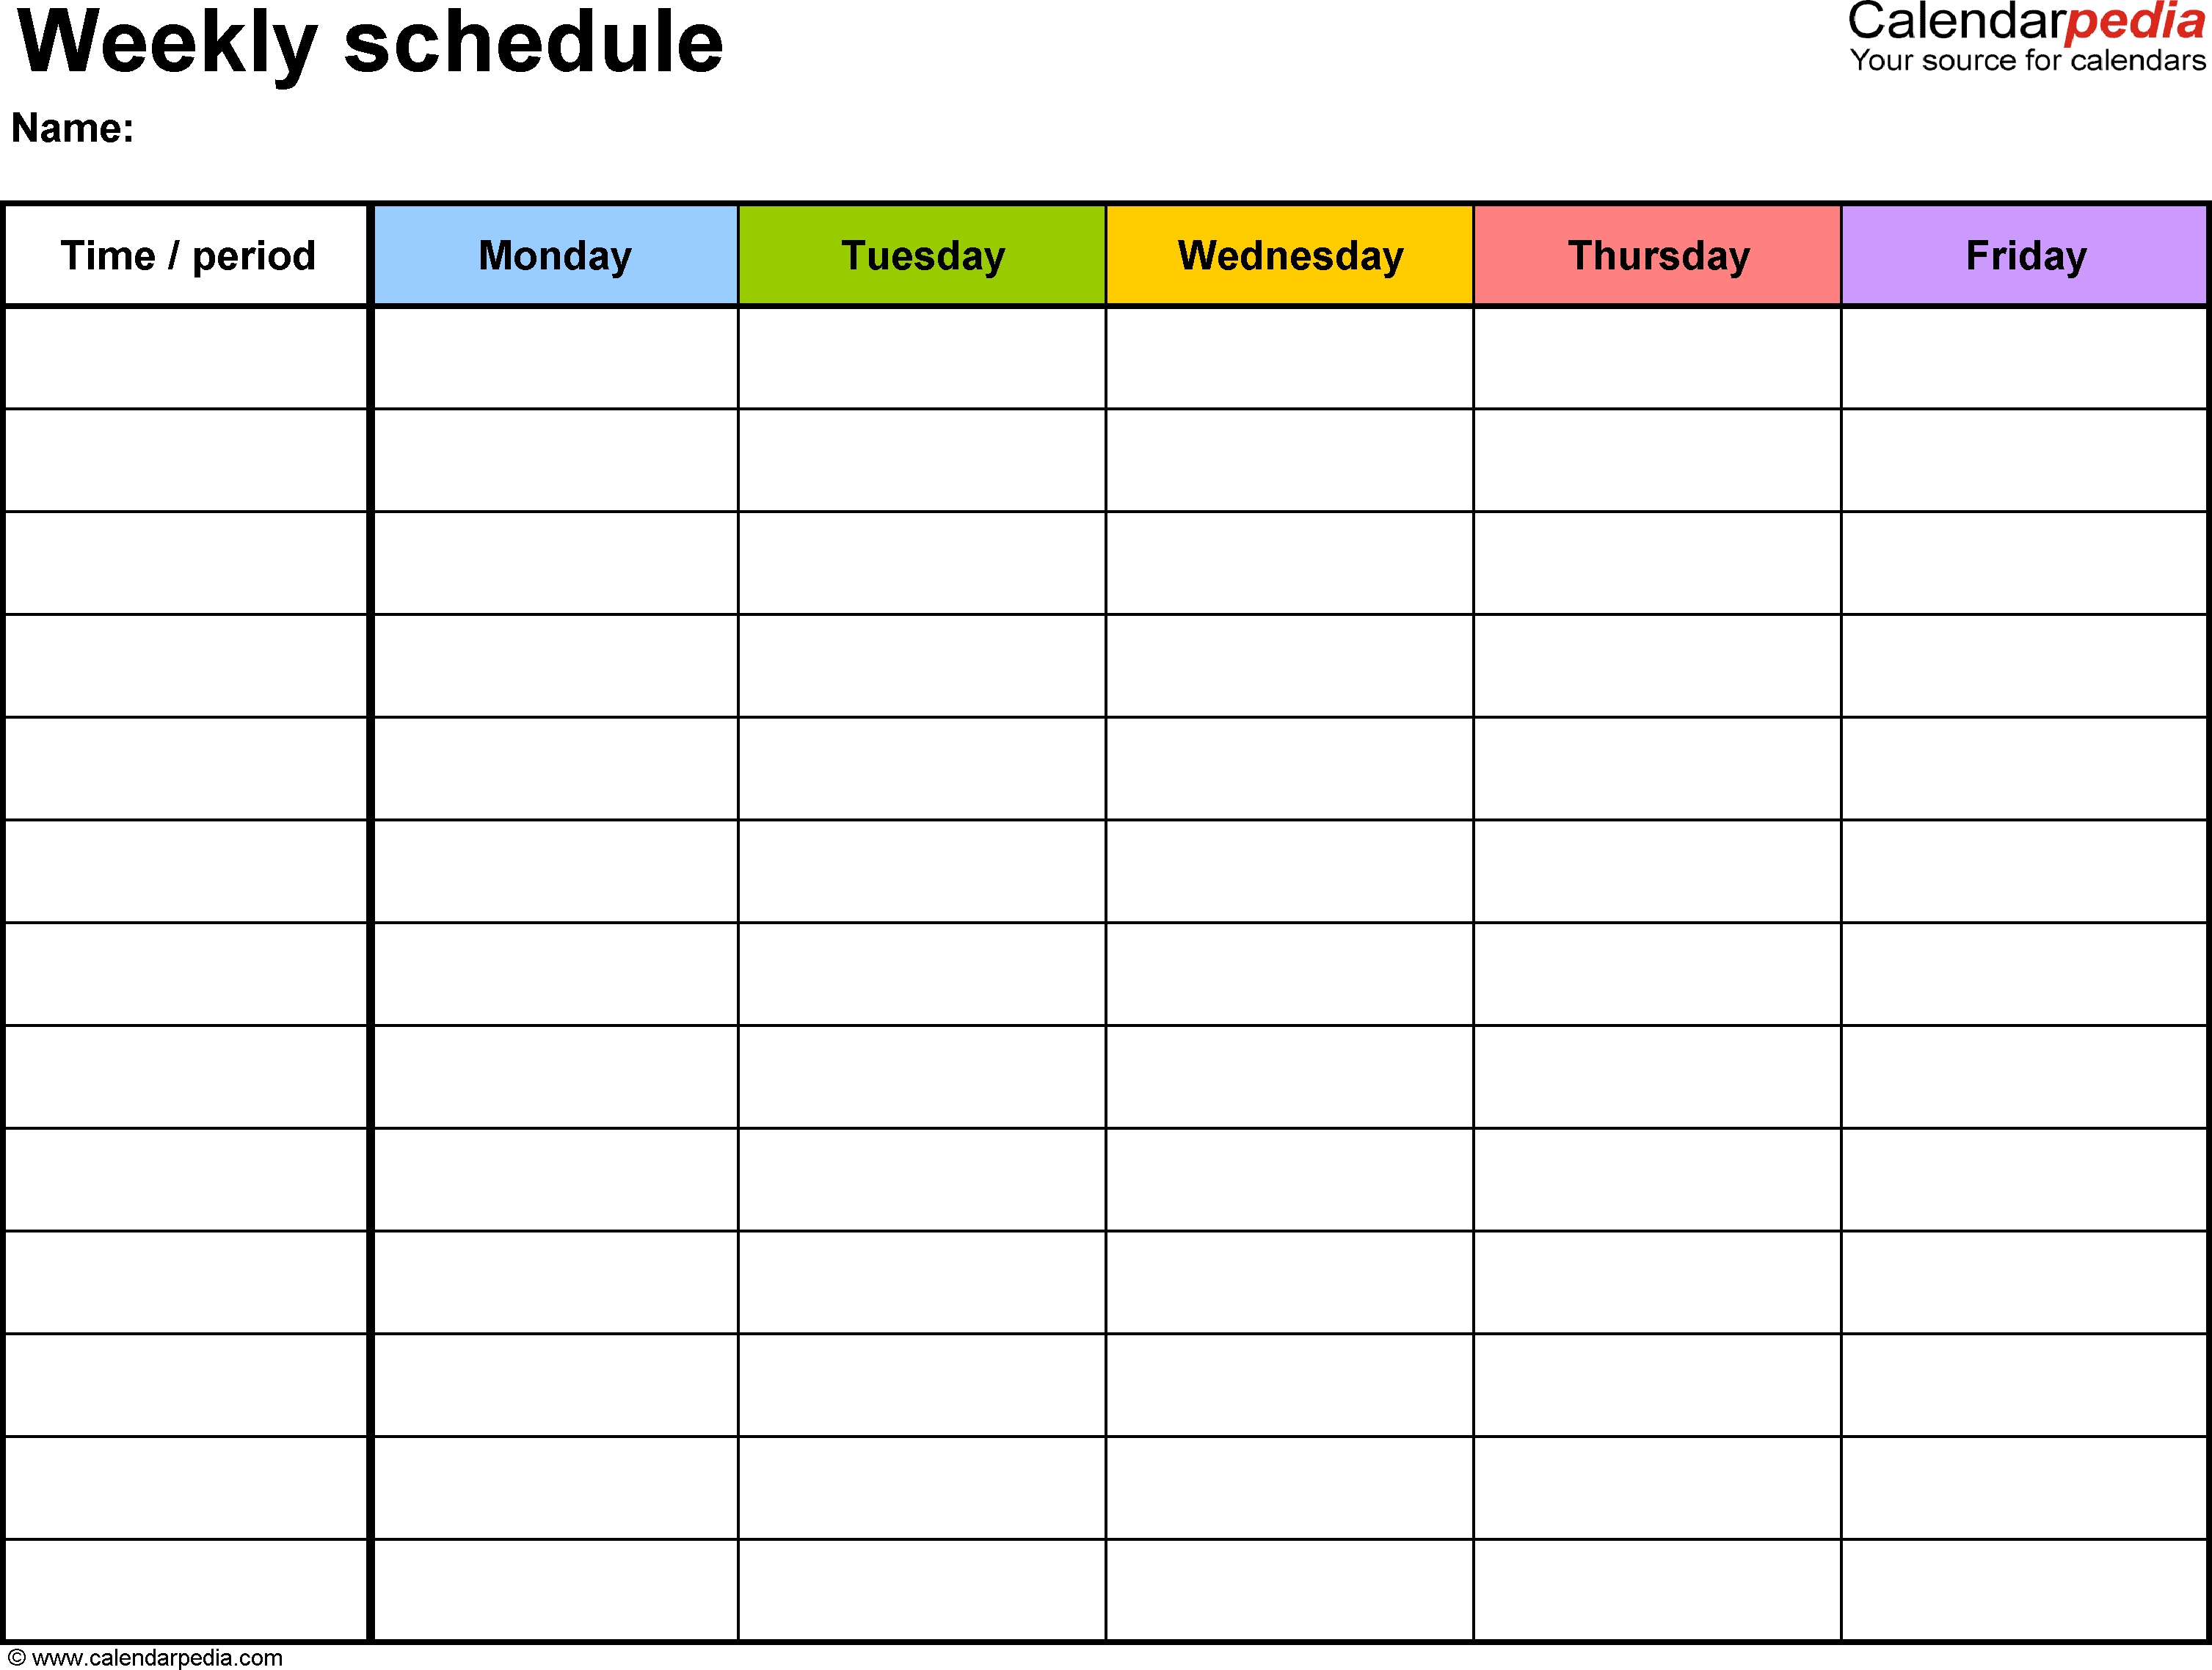 Free Weekly Schedule Templates For Word - 18 Templates within Free Calendars Monday To Sunday